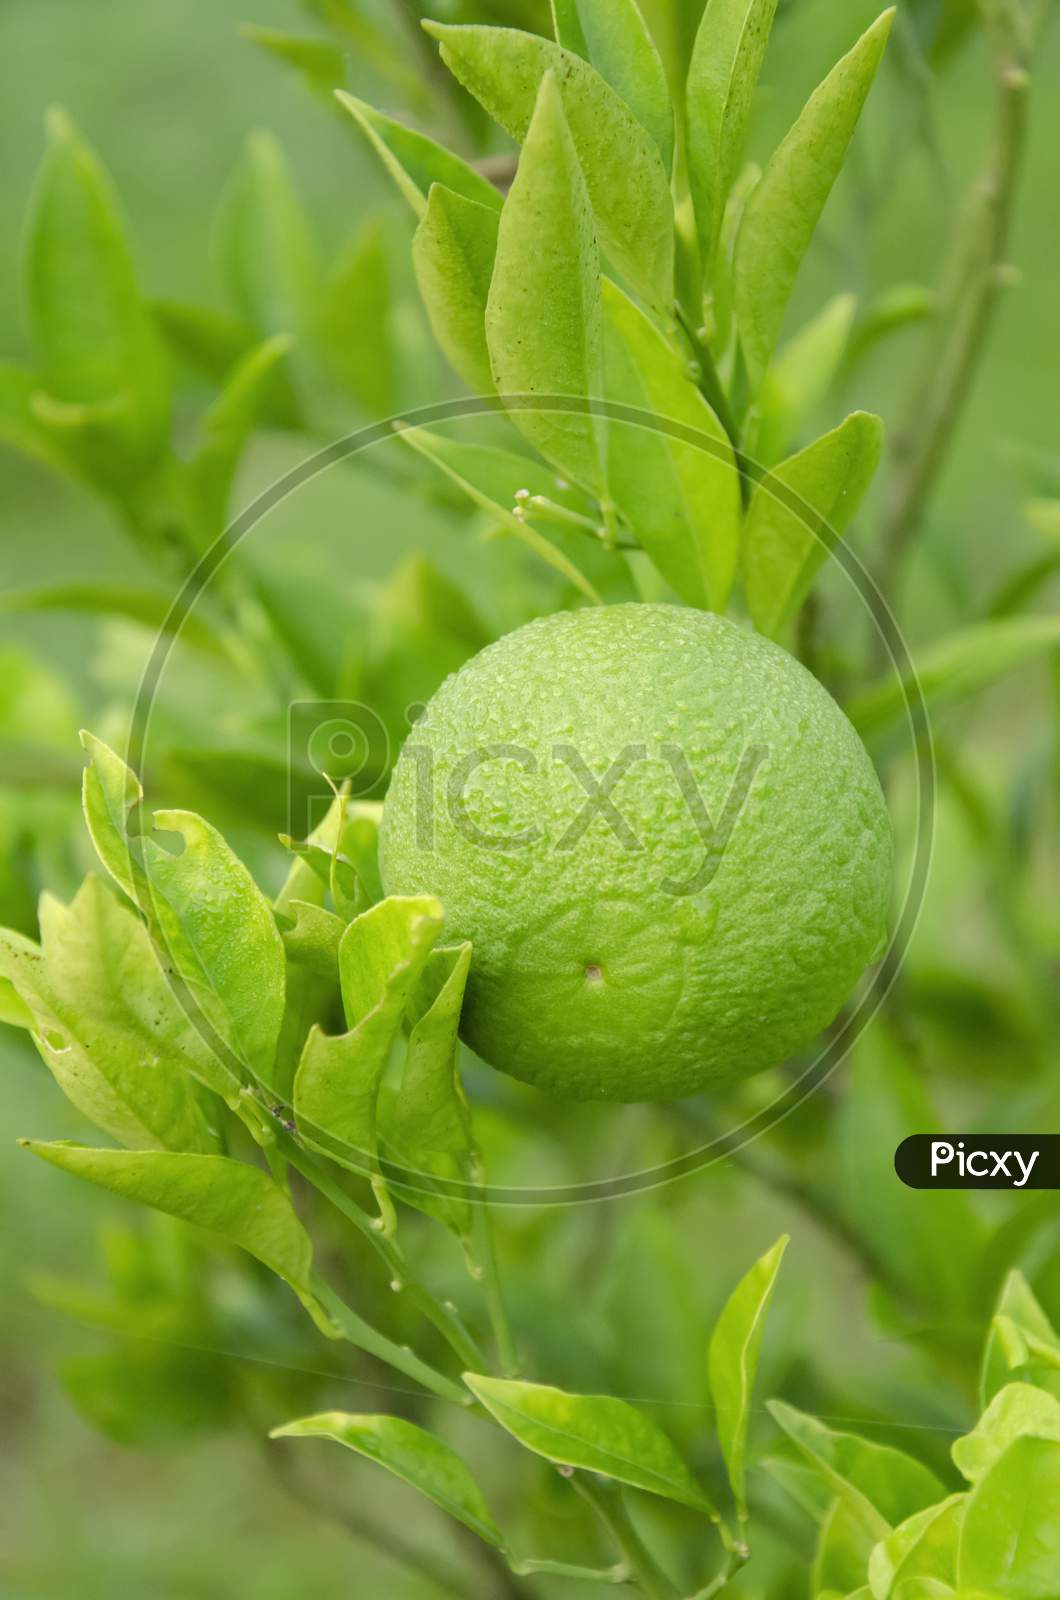 Green Mosambi or sweet lime with green leaves in the garden with blur background in vertical.